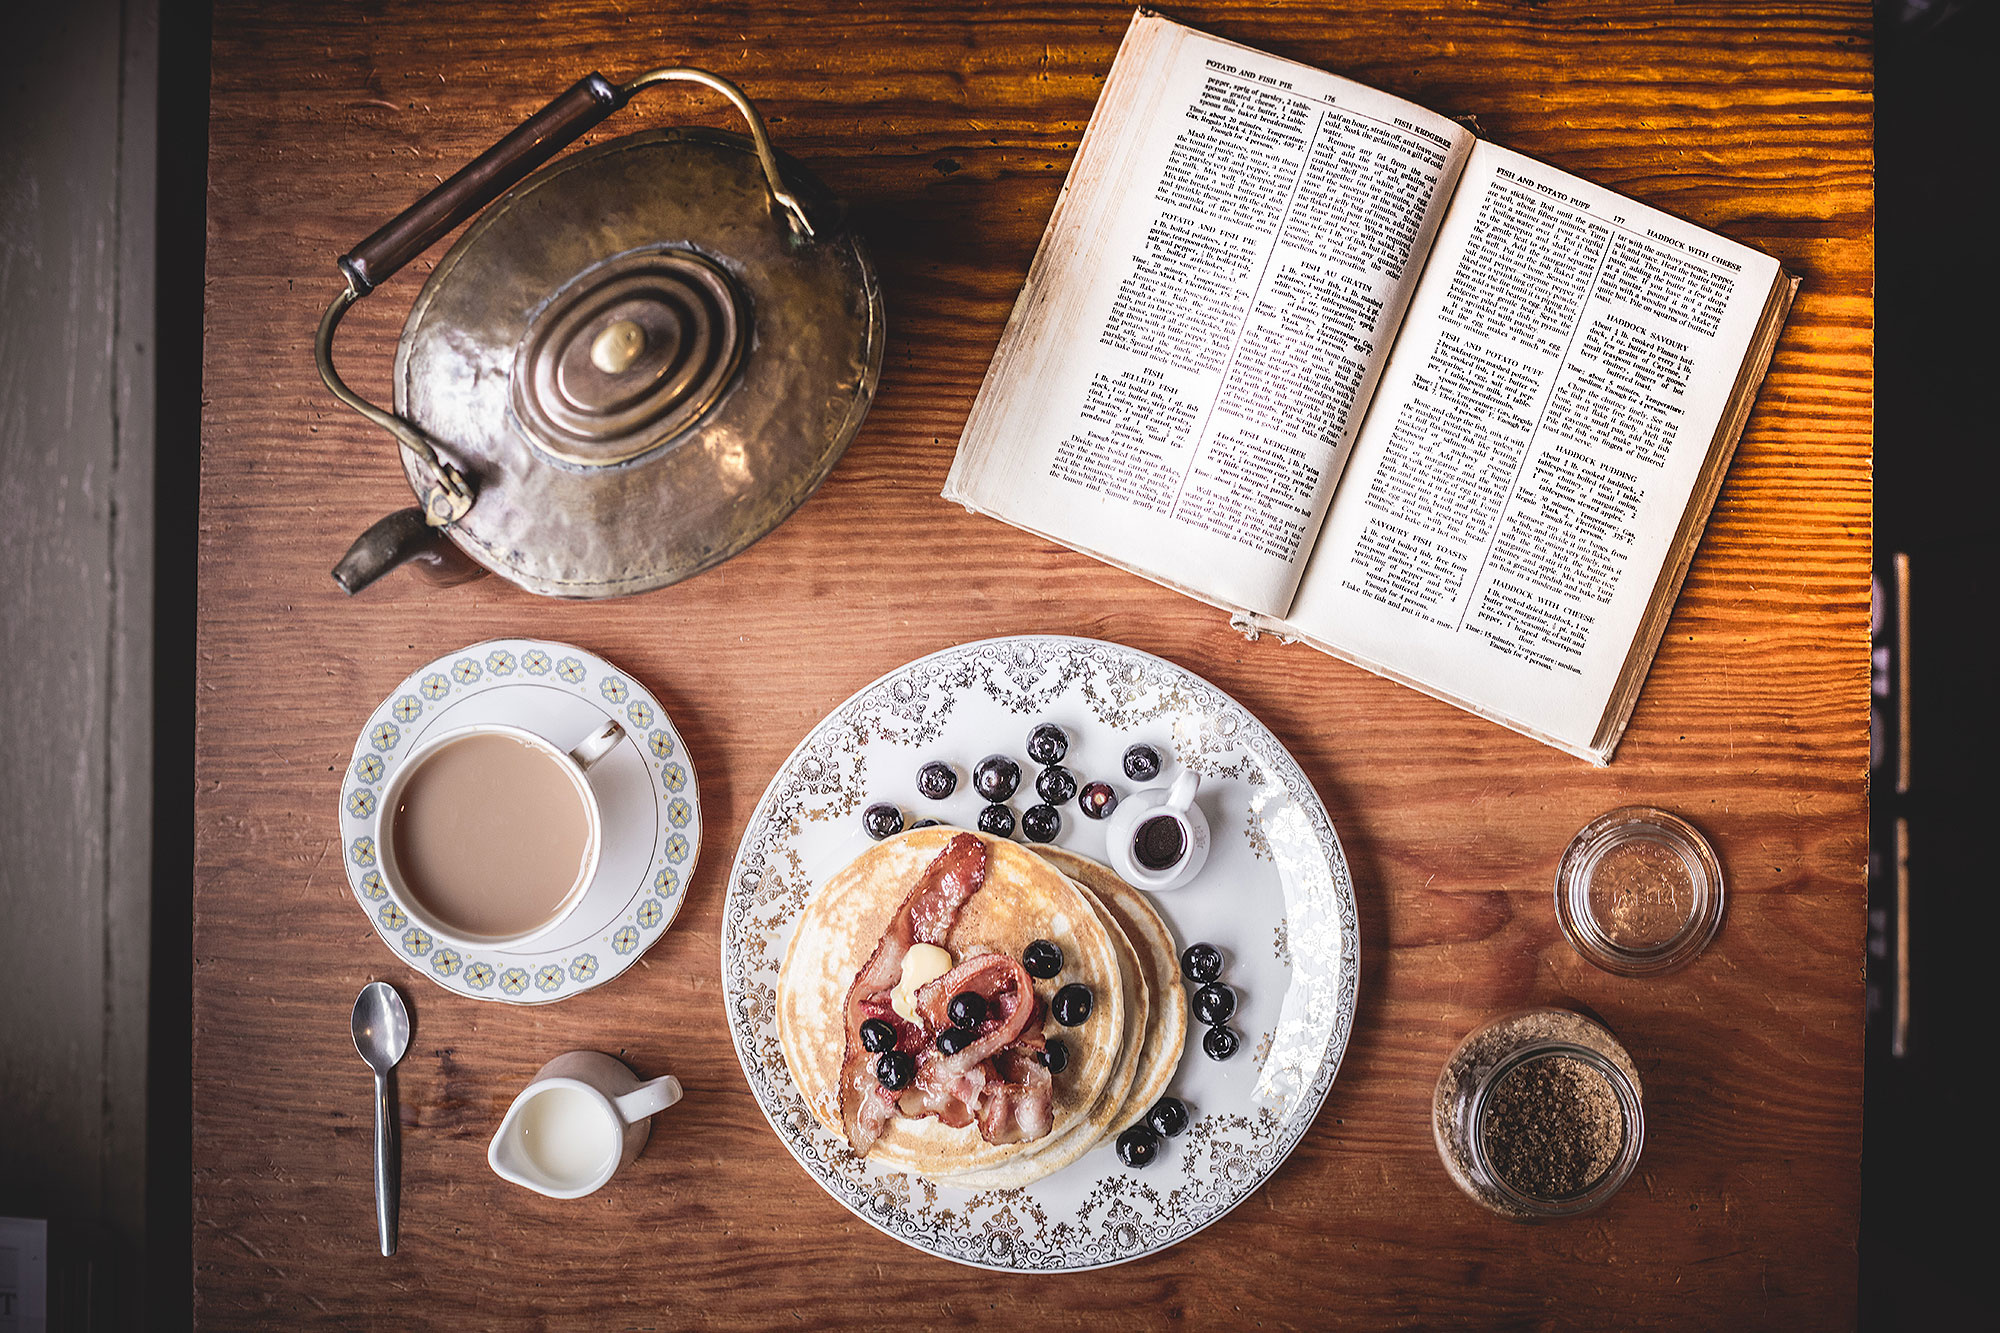 Image of an old-fashioned kettle, a cup of tea, a book and a plate of pancakes with blueberries 